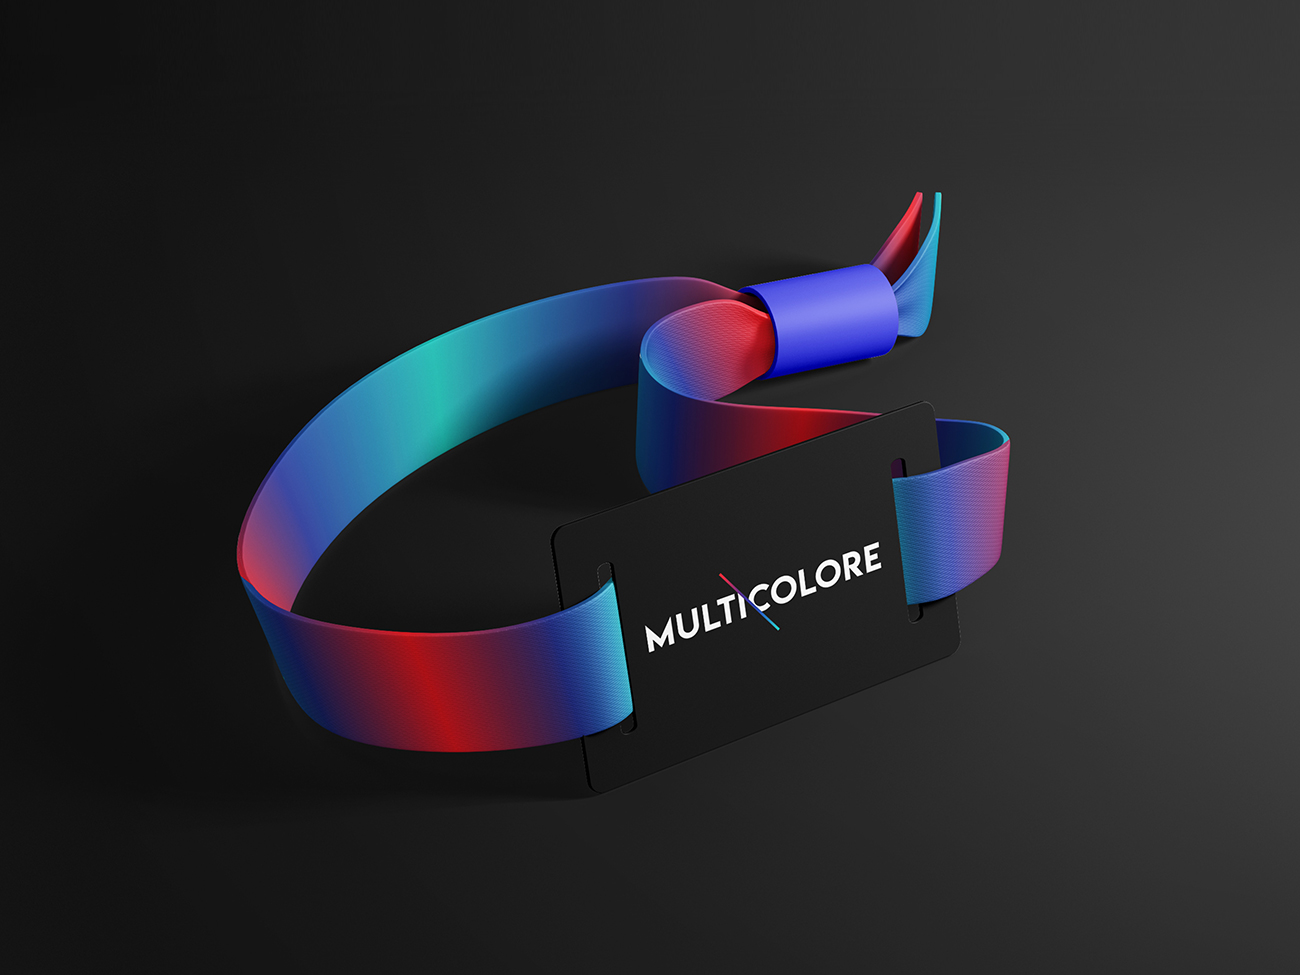 multicolore_branding_by-catherine-bisaillon_1300x975_002